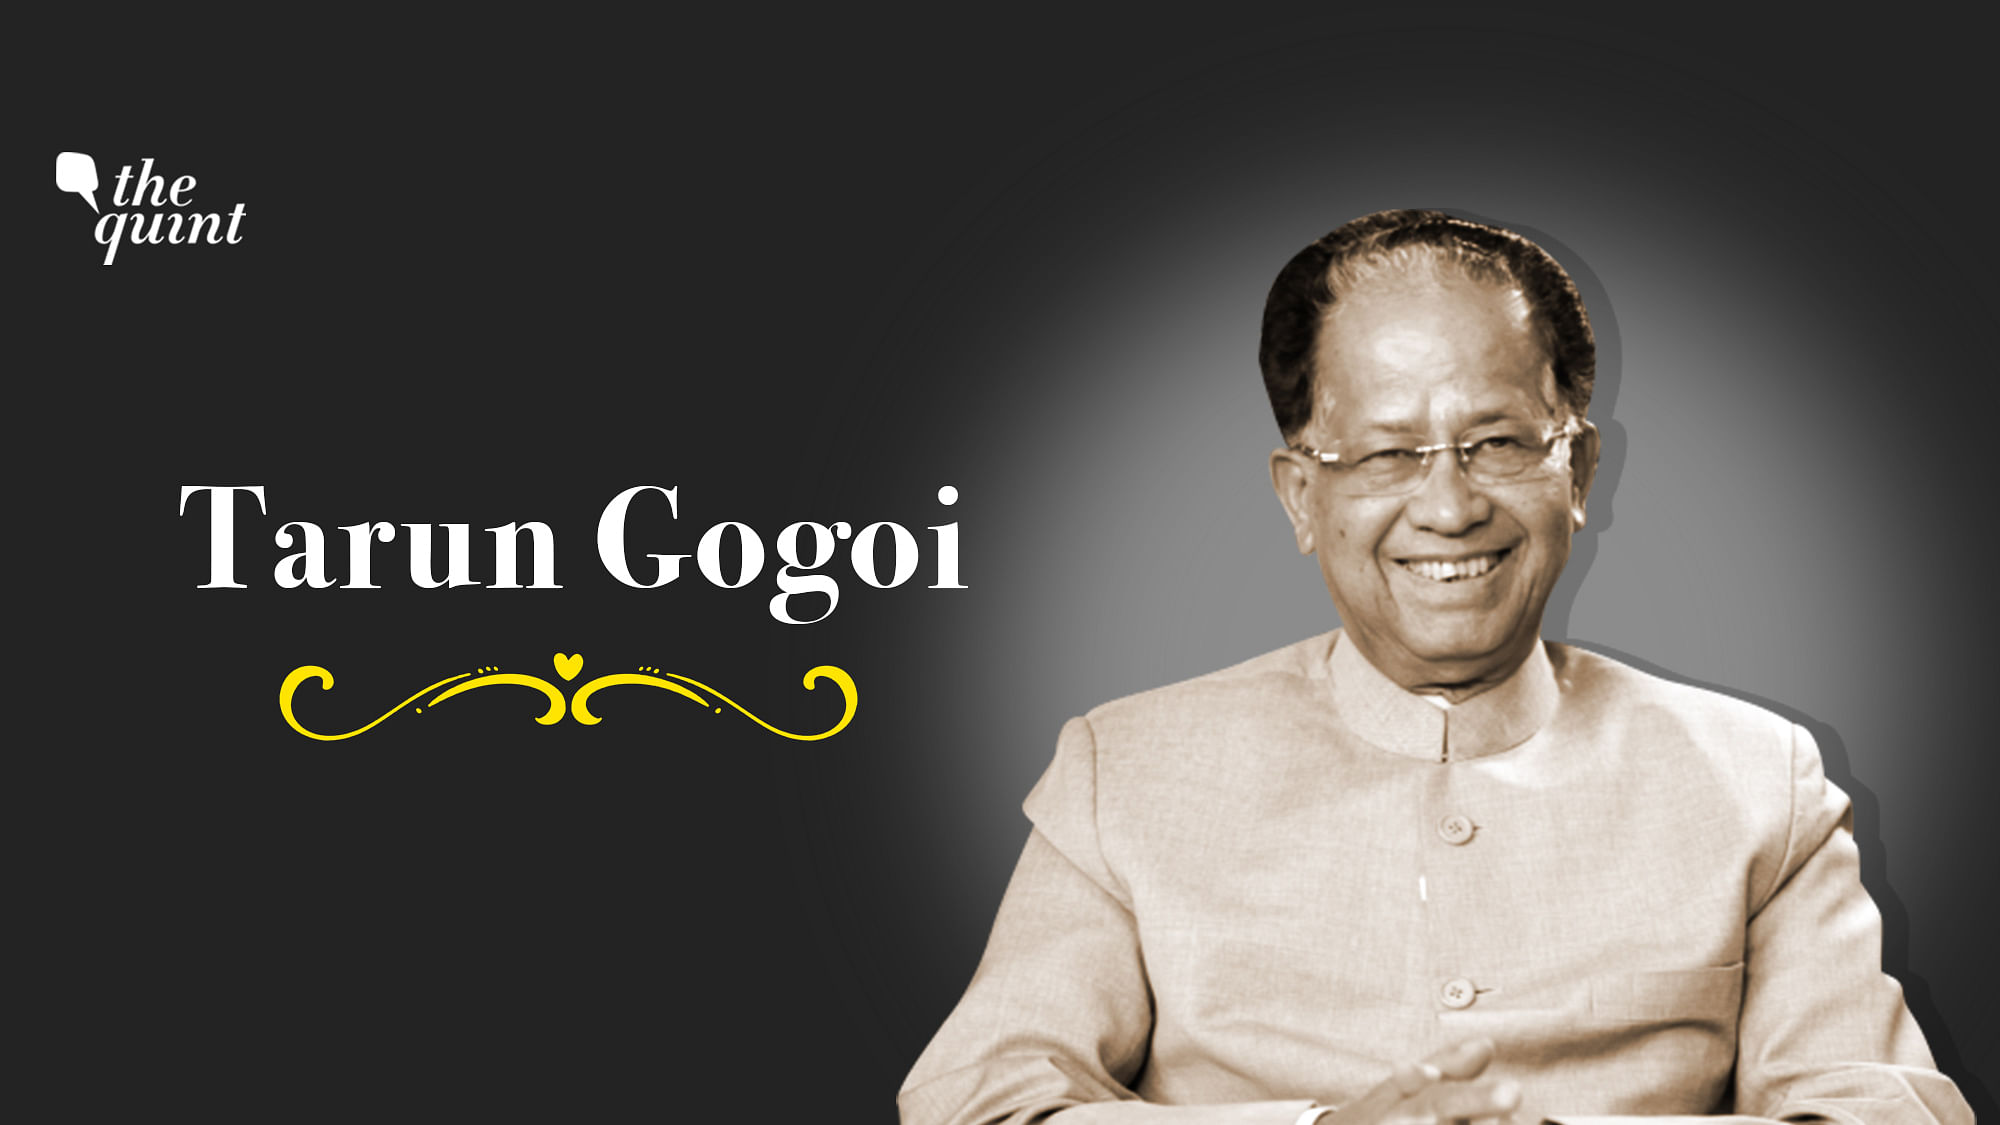 Following post-COVID-19 complications, Tarun Gogoi was put on ventilation since his admission at Gauhati Medical College and Hospital (GMCH) on 2 November.